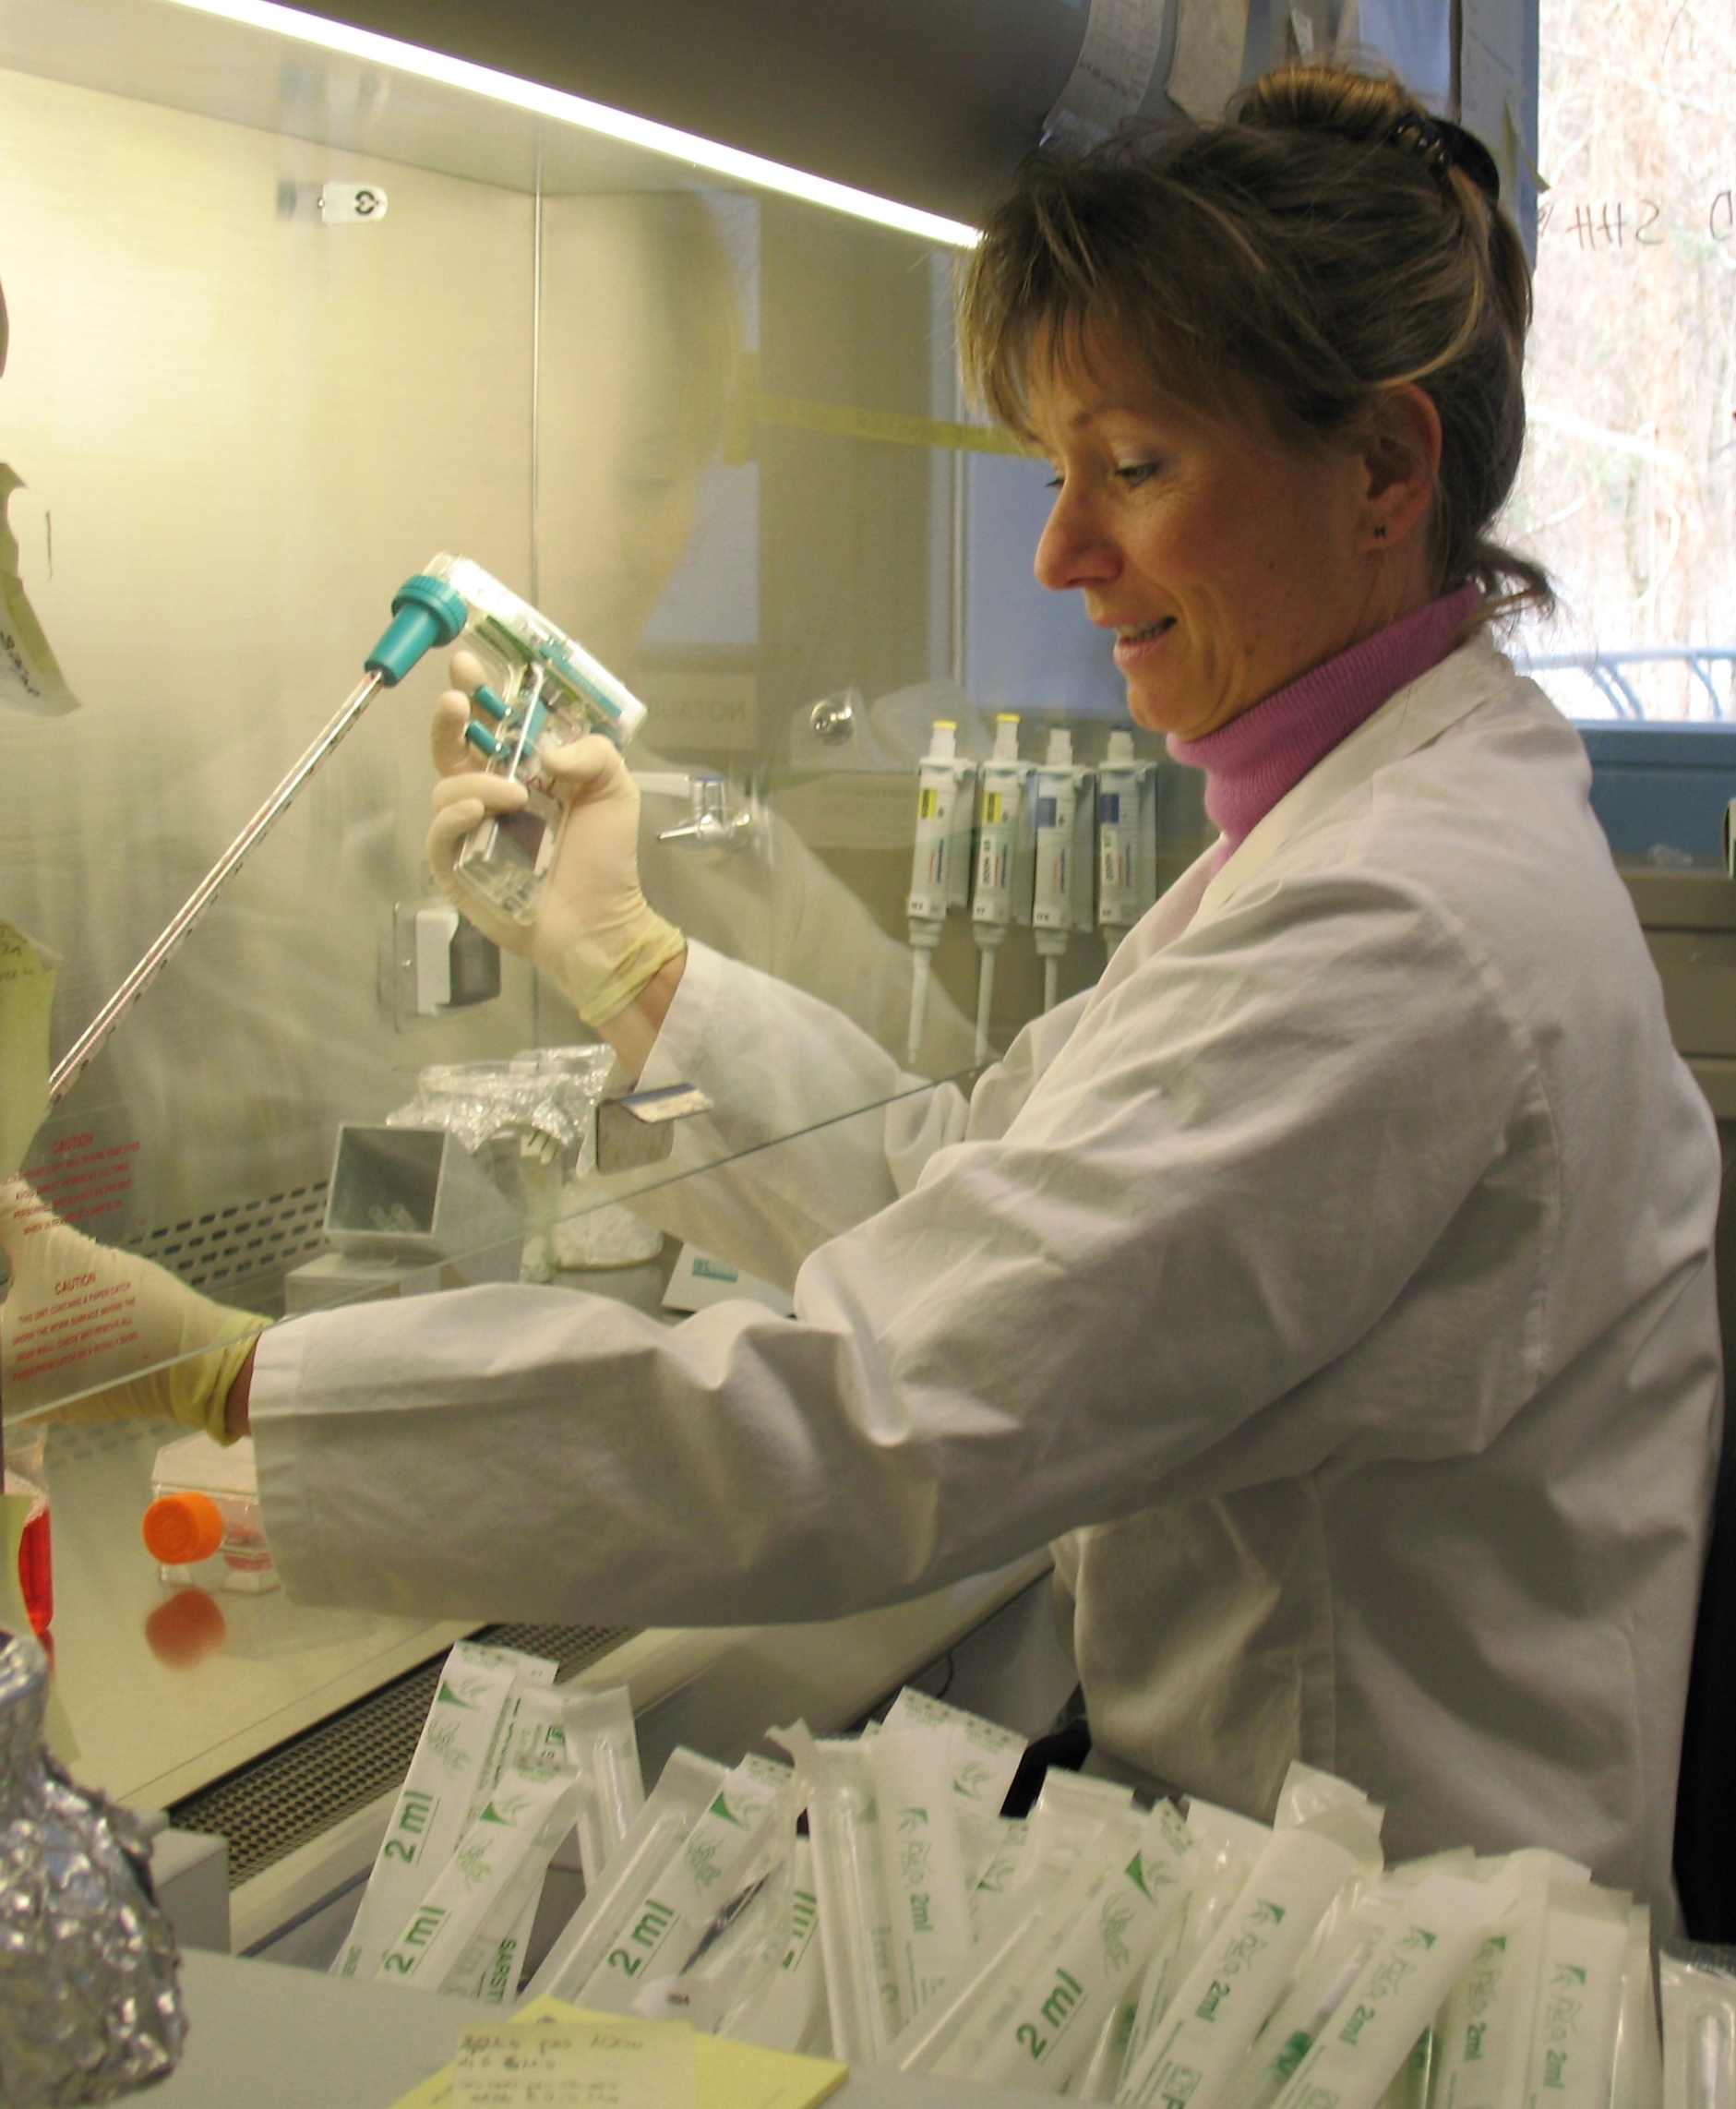 The photo shows Dr. Suzanne Kadereit working at a laminar flow cabinet in the university's cell culture laboratory.